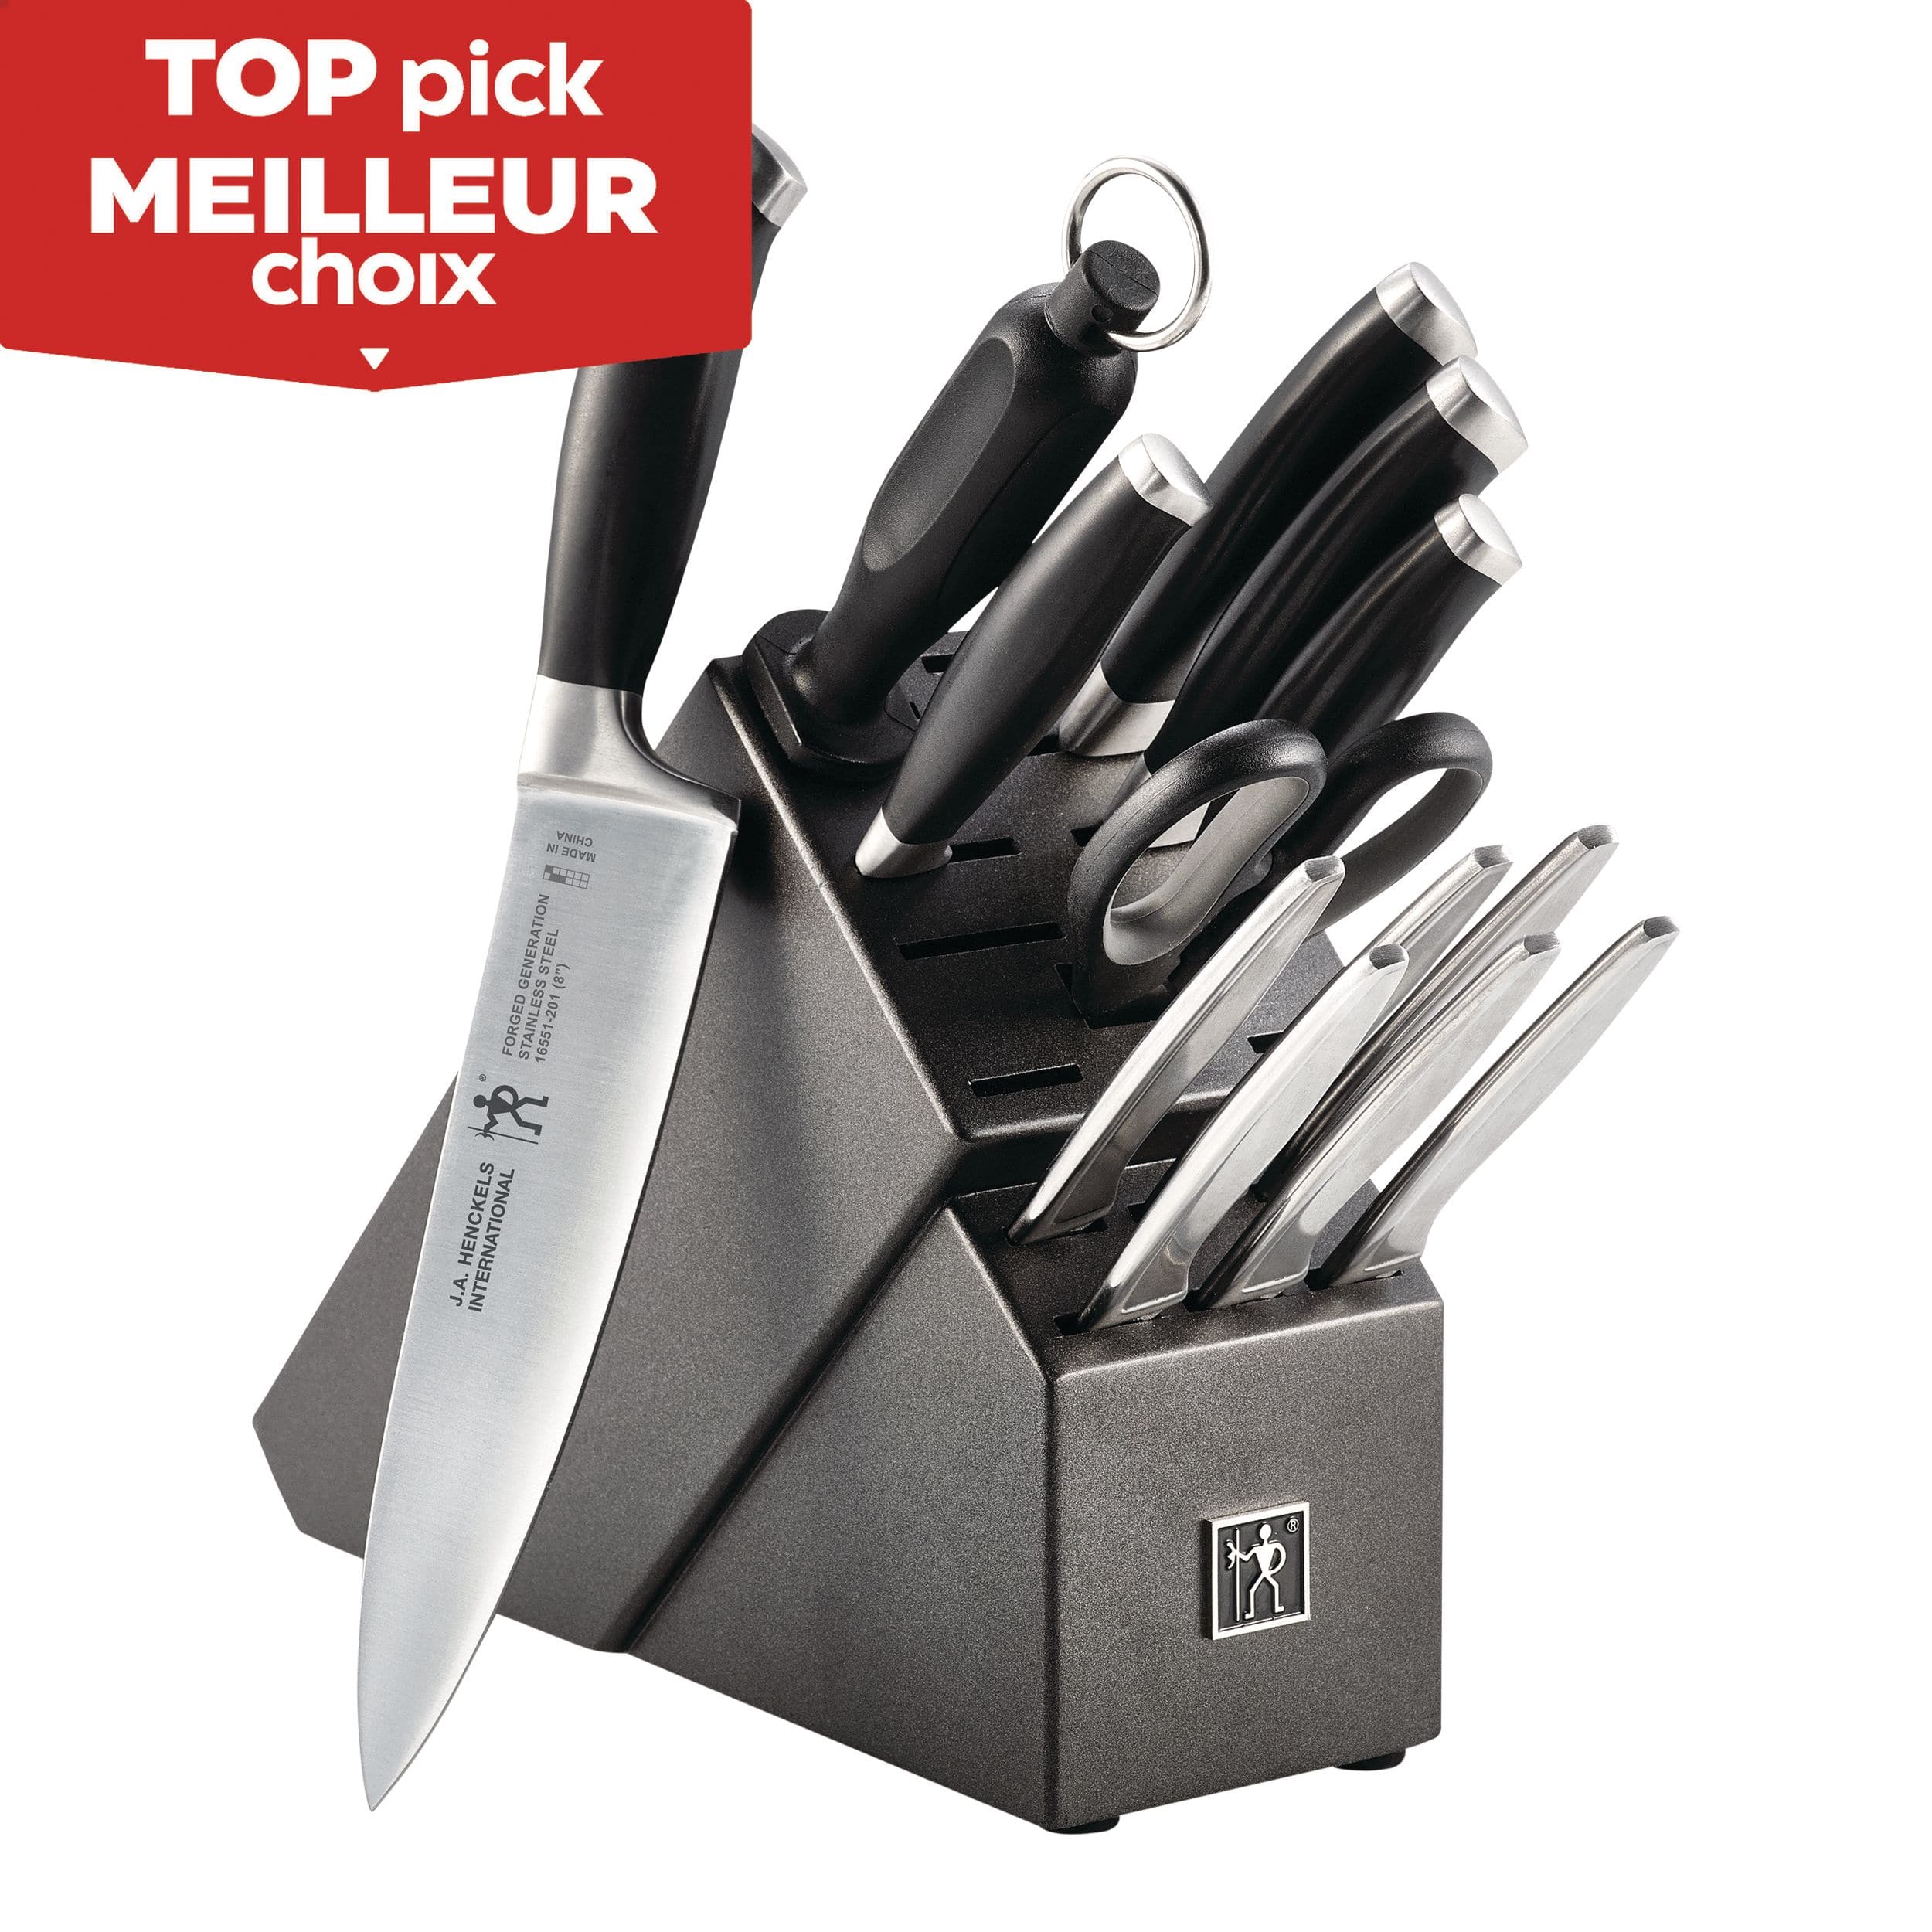 https://media-www.canadiantire.ca/product/living/kitchen/cutlery/0423911/14-piece-henckels-forged-knife-set-7c4ee5ce-aa20-42b4-b986-b00ebe2be1fc-jpgrendition.jpg